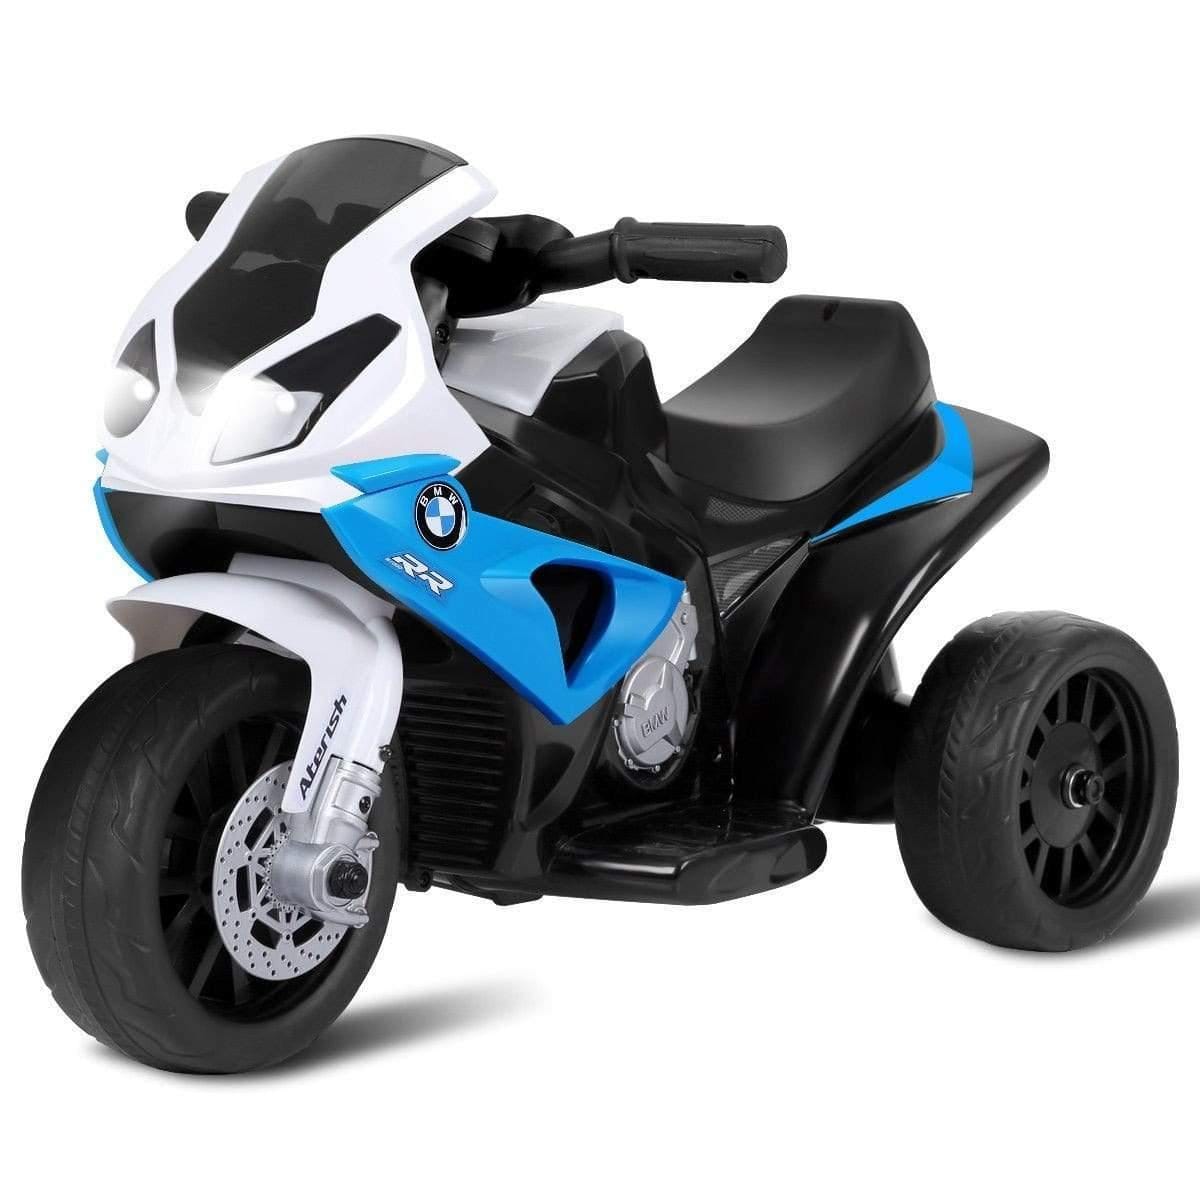 Costway 3 Wheeler Blue 6V Kids 3 Wheels Riding BMW Licensed Electric Motorcycle